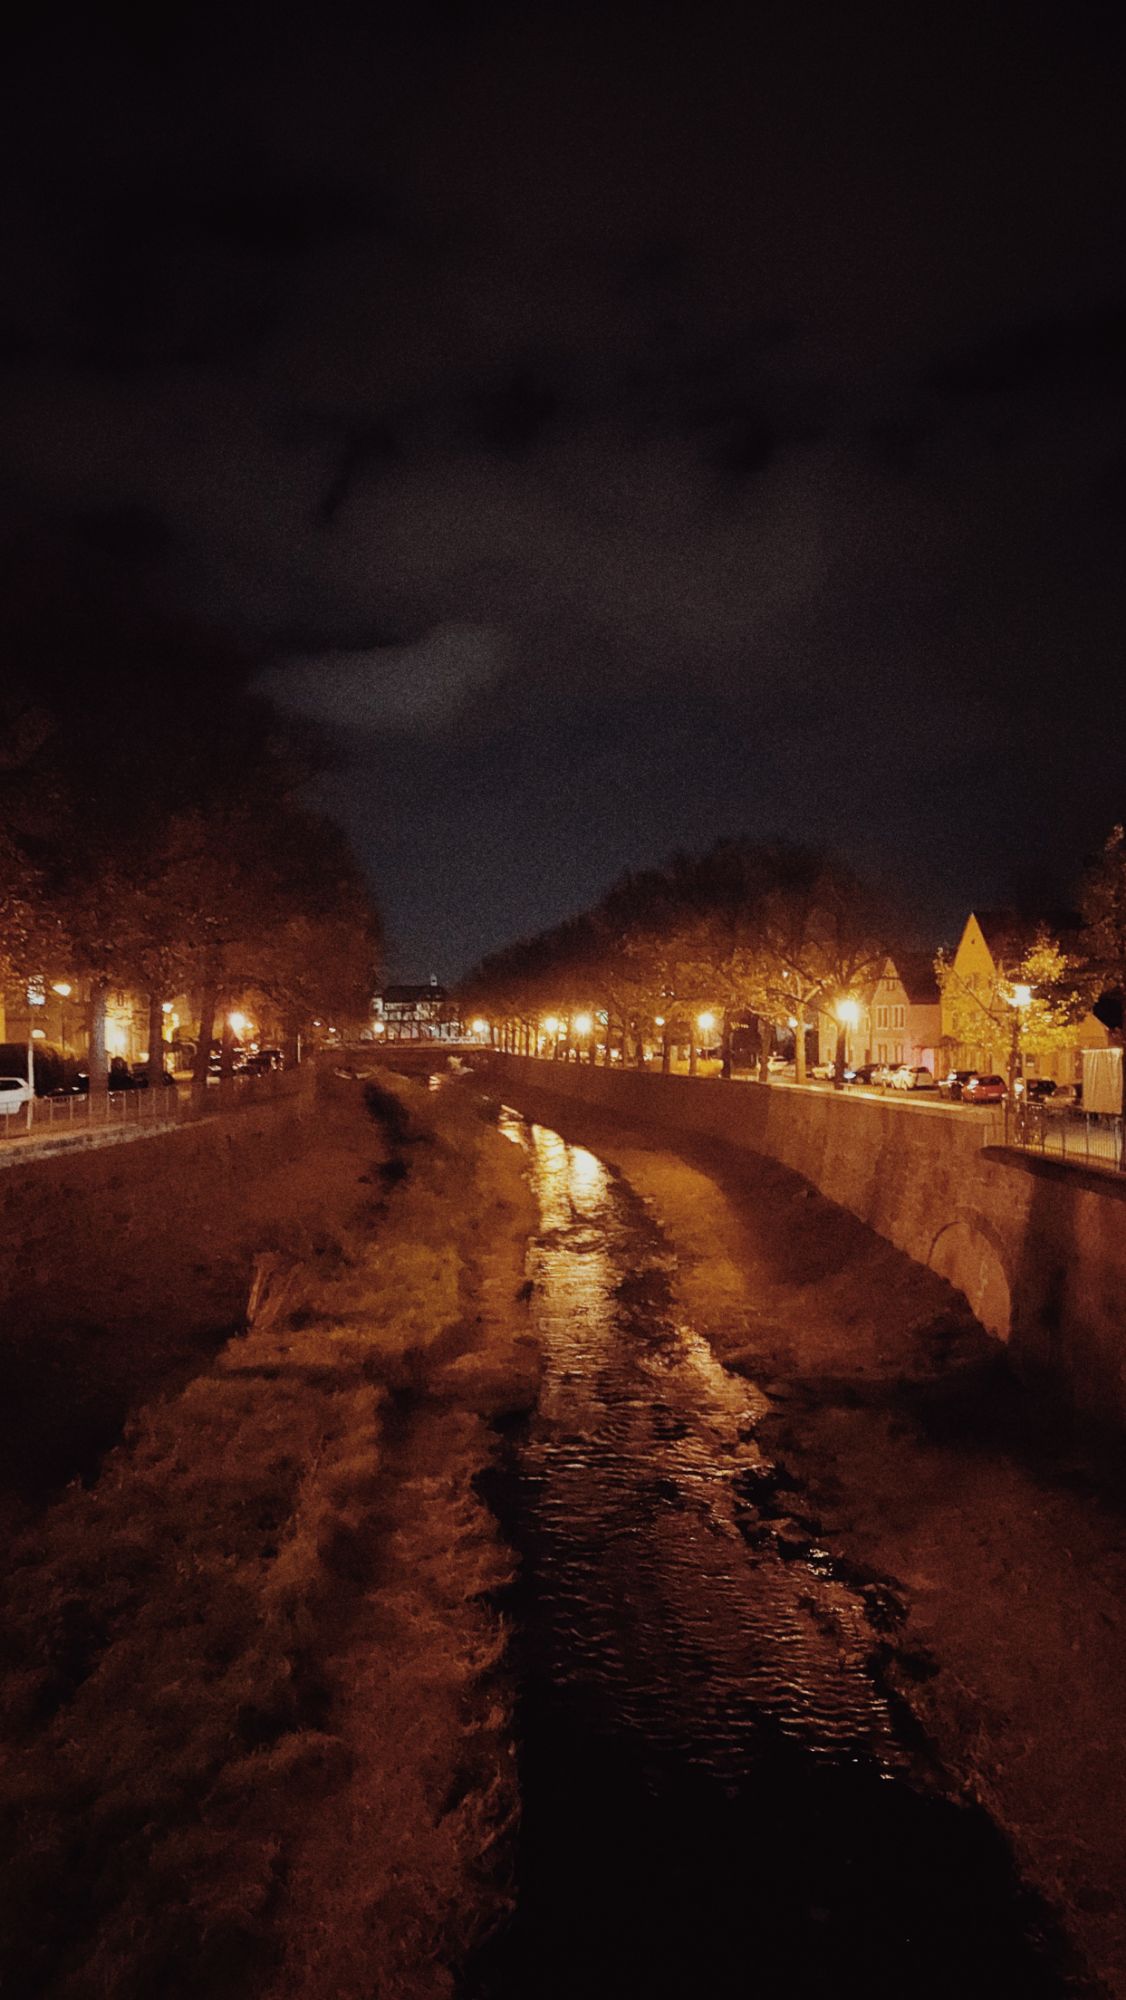 A small river in a narrow channel, surrounded by a stripe of meadow, trees and city. Beyond dusk. Night lights.